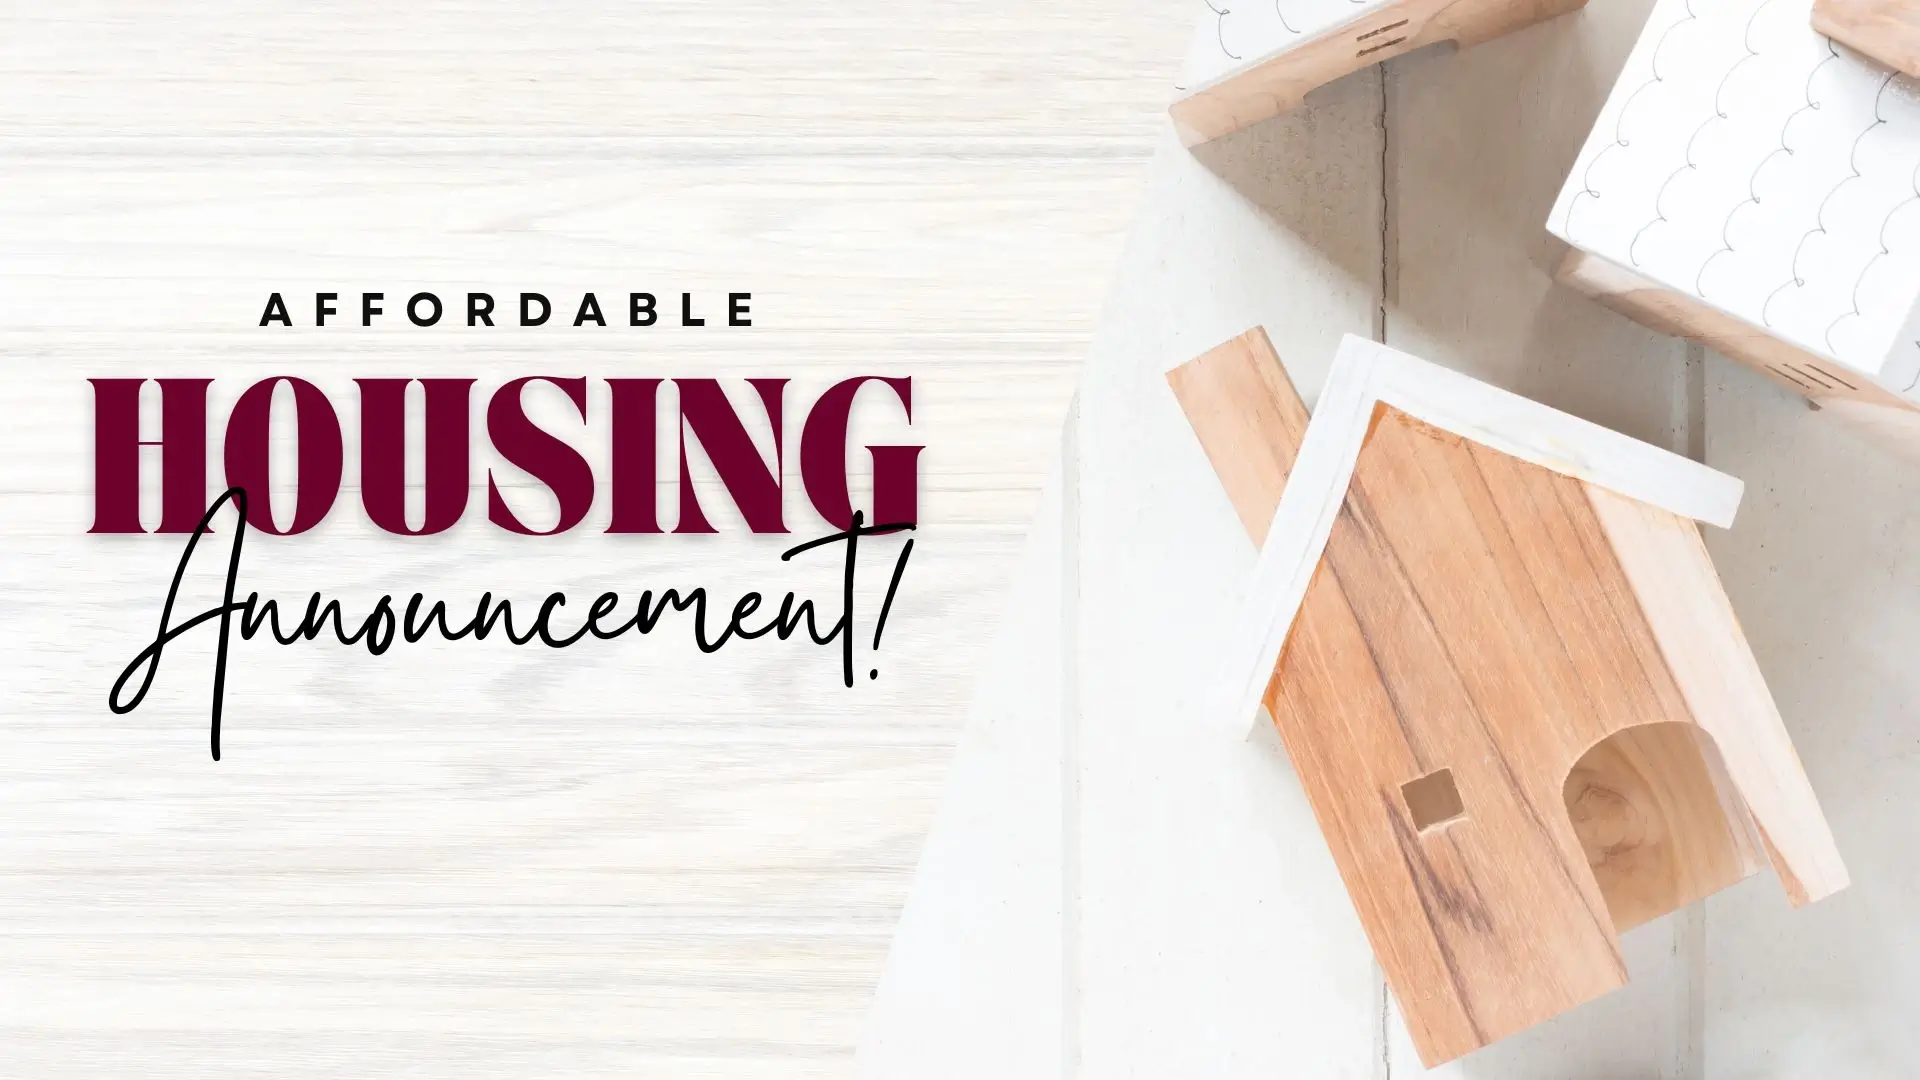 Additional Affordable Housing Funding Available